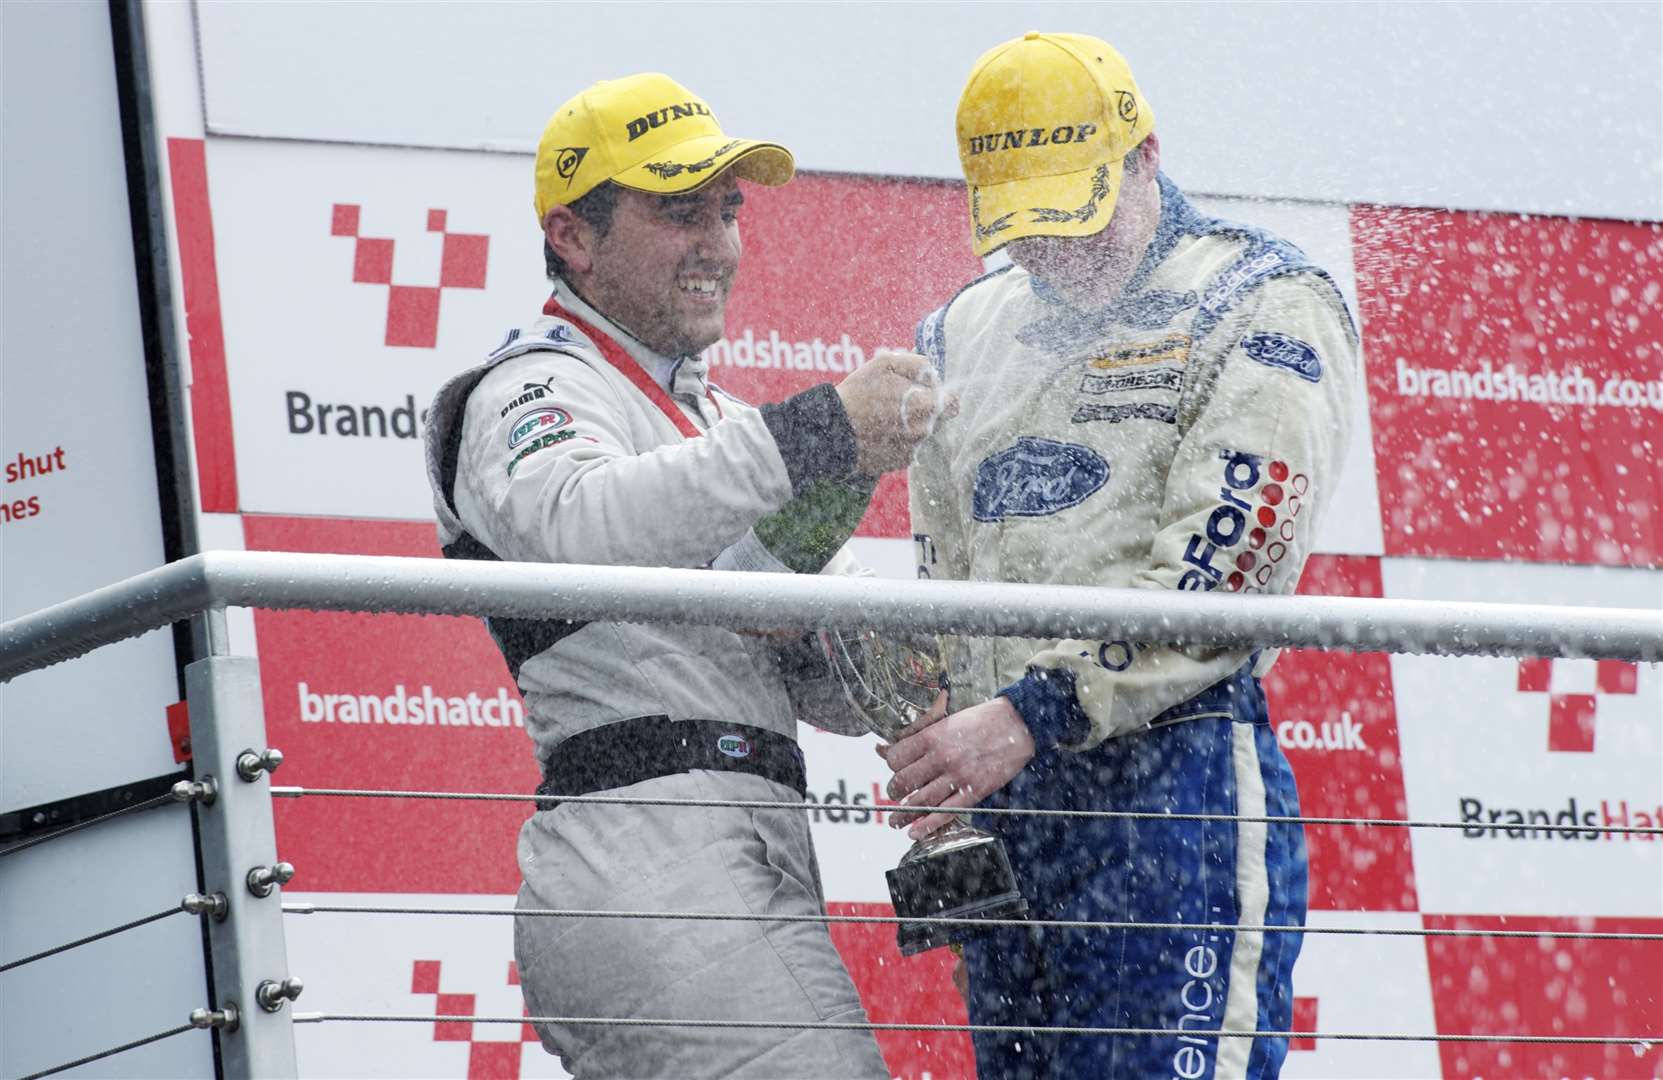 Scott Malvern, left, says he "wouldn't have a career if it wasn't for Buckmore". He's pictured here at Brands Hatch in July 2011 after winning a British Formula Ford Championship round with Rochester-based Jamun Racing